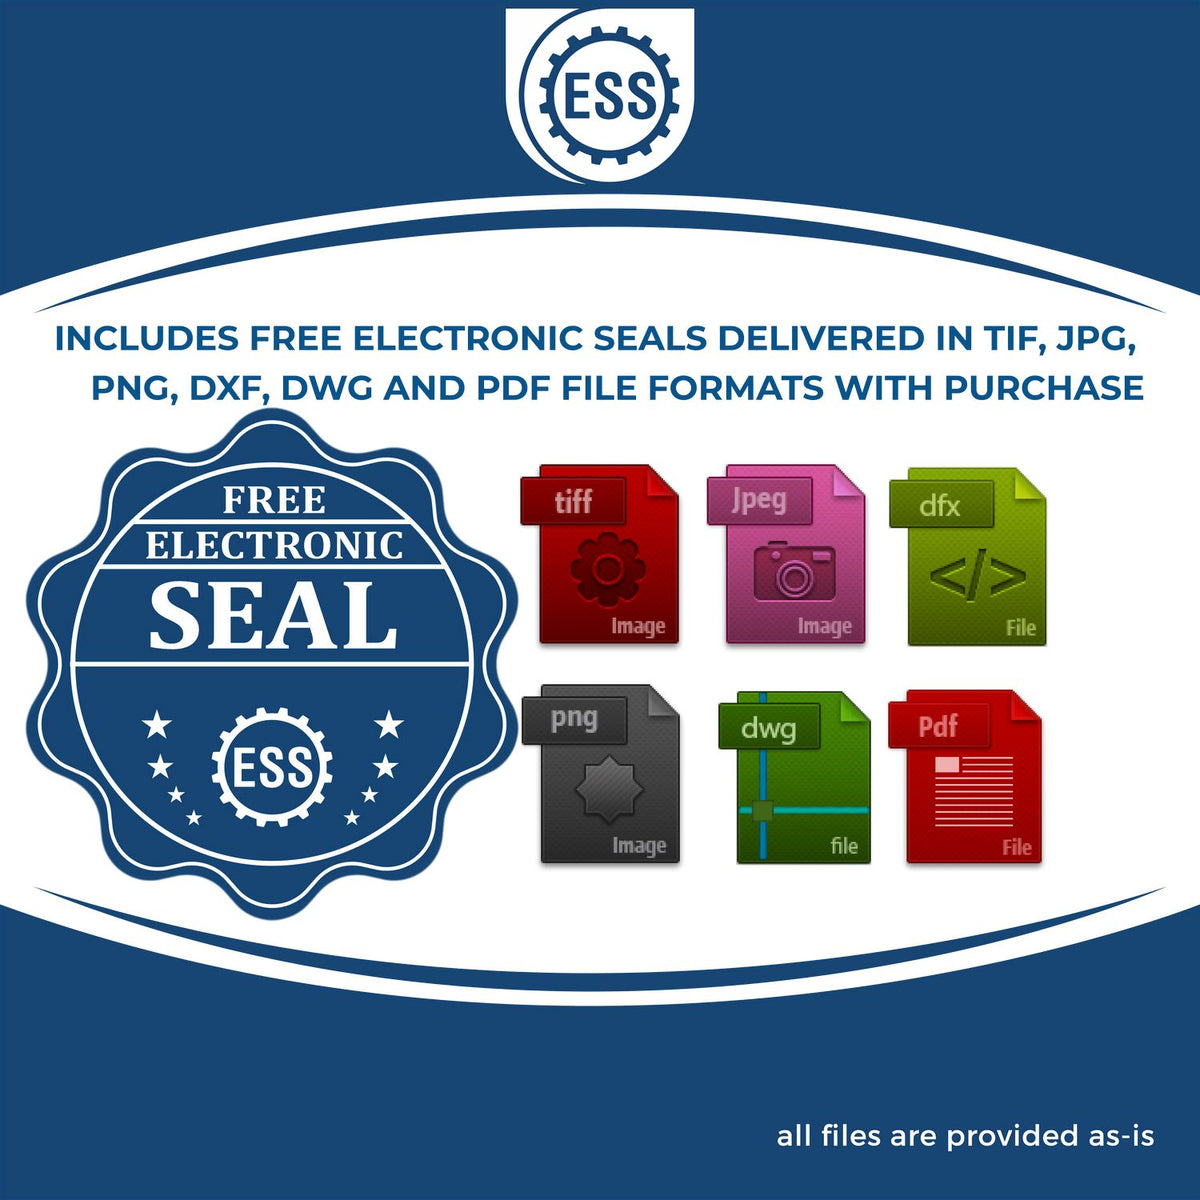 An infographic for the free electronic seal for the Hybrid Nebraska Landscape Architect Seal illustrating the different file type icons such as DXF, DWG, TIF, JPG and PNG.